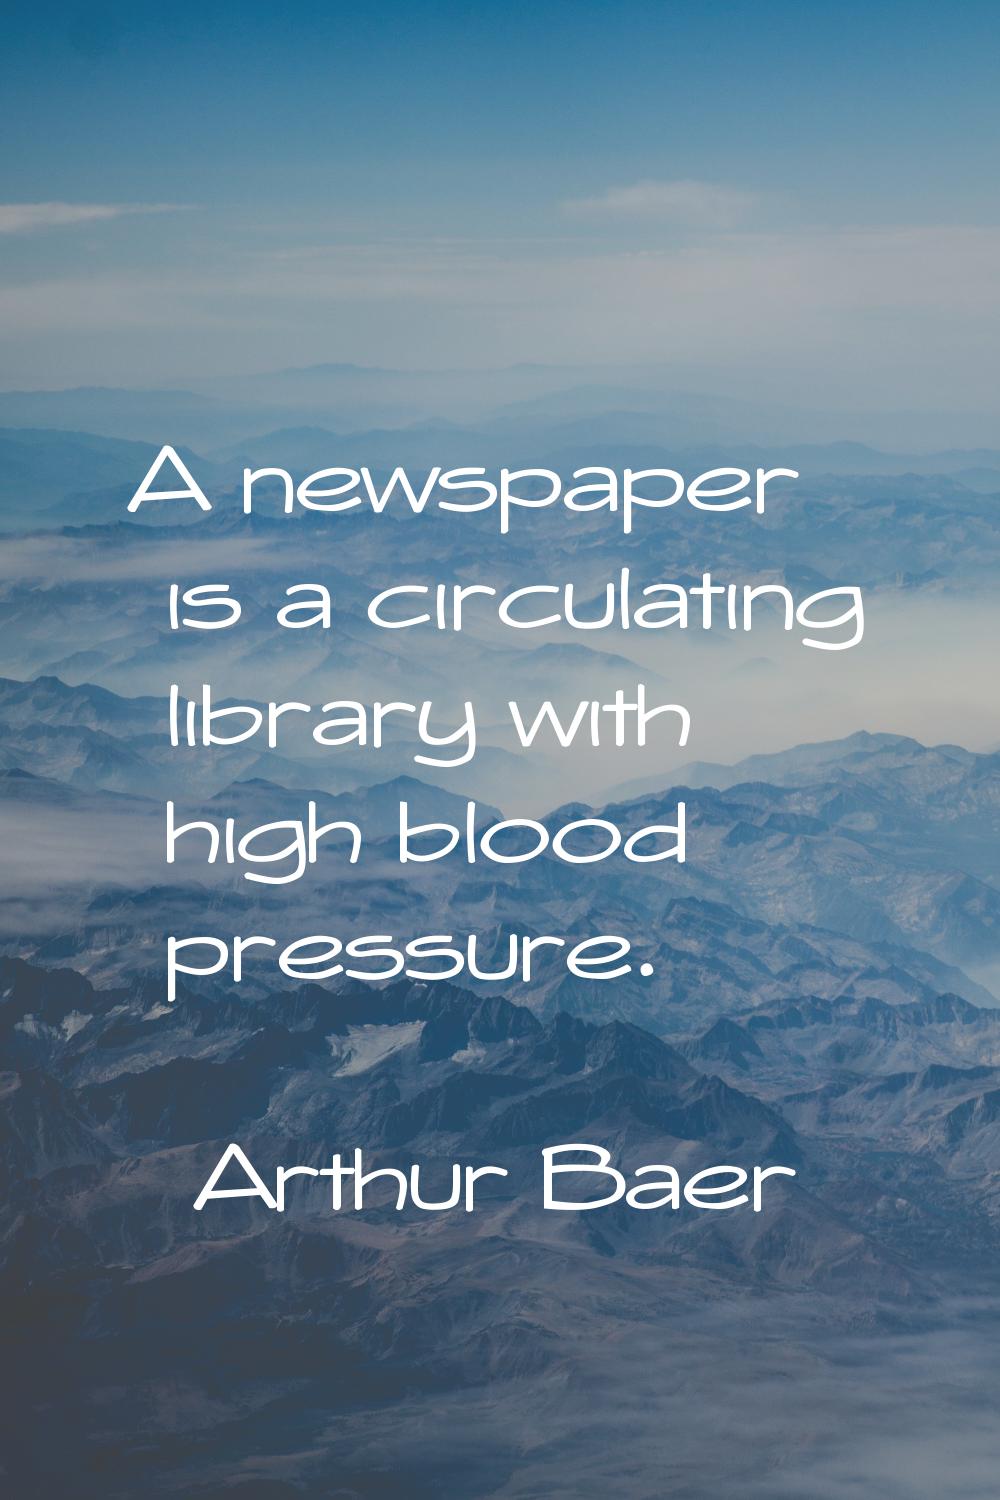 A newspaper is a circulating library with high blood pressure.